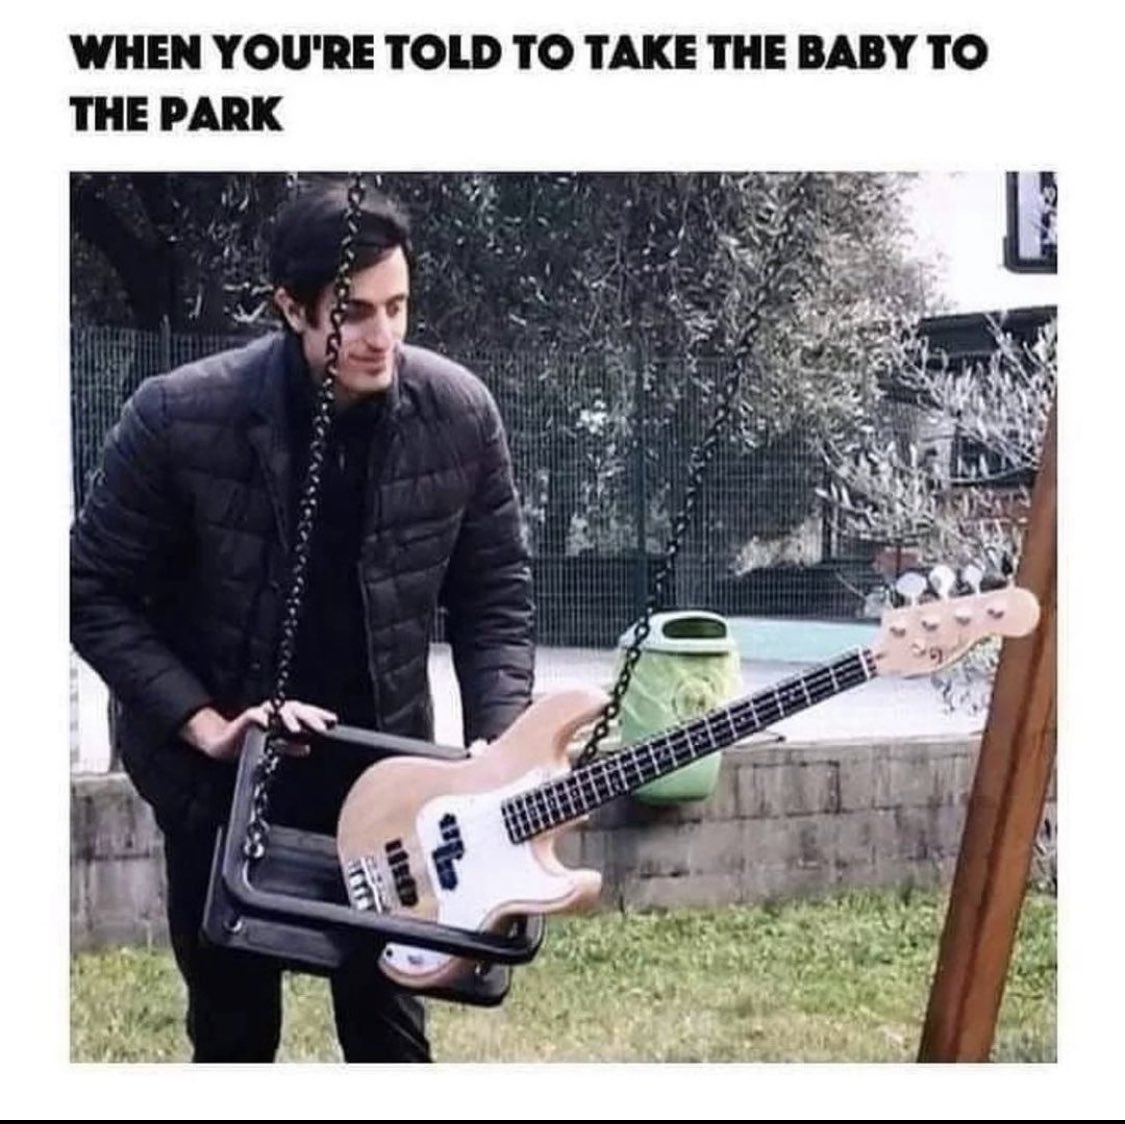 LEARN TO PLAY YOUR BASS BABY. Get Bass lessons in Orange County CA or online with Hamrock Music. 
hamrockmusic.com
 #basslessons #basslesson #basslessonsonline #onlinebasslesson #howtoplaybasslines #bassguitar #bassplayer #bassplayers #onlinebasslessons